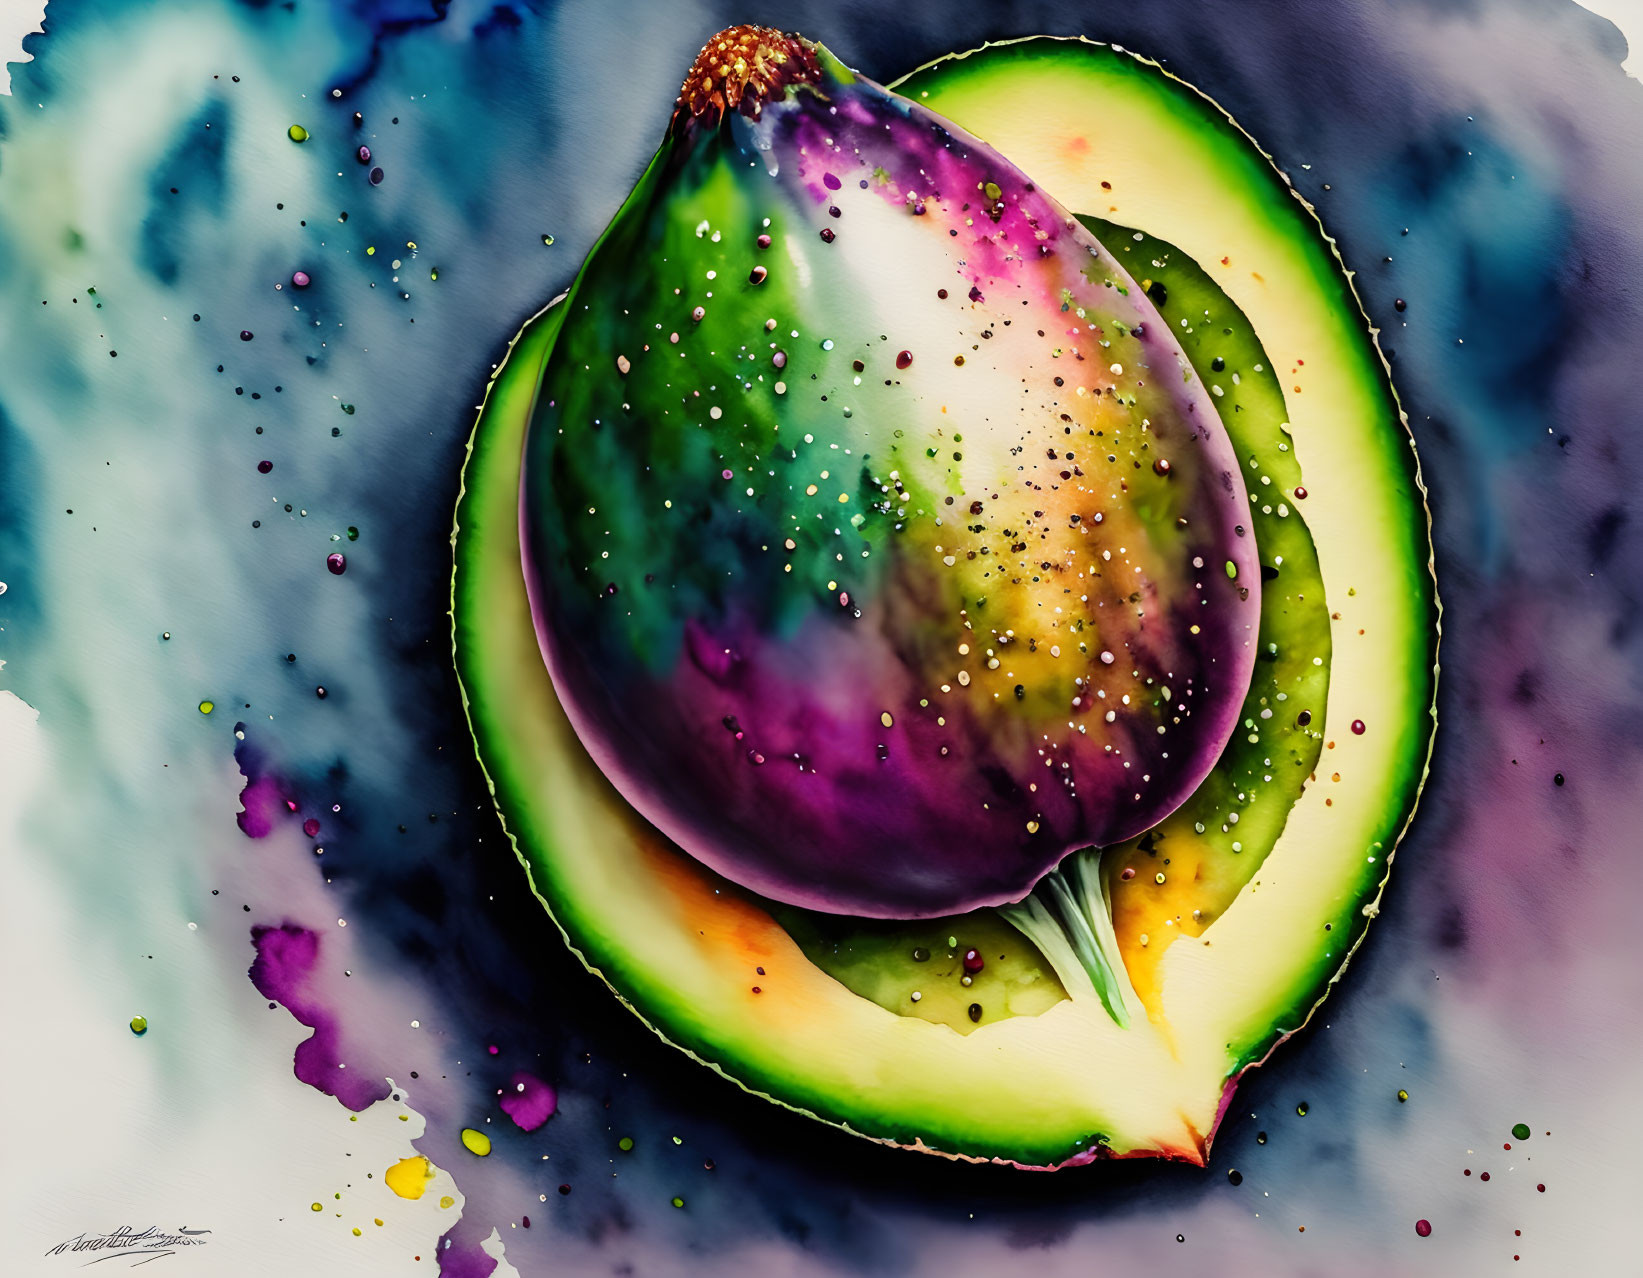 Colorful Watercolor Illustration of Sliced Avocado with Splattered Ink Droplets